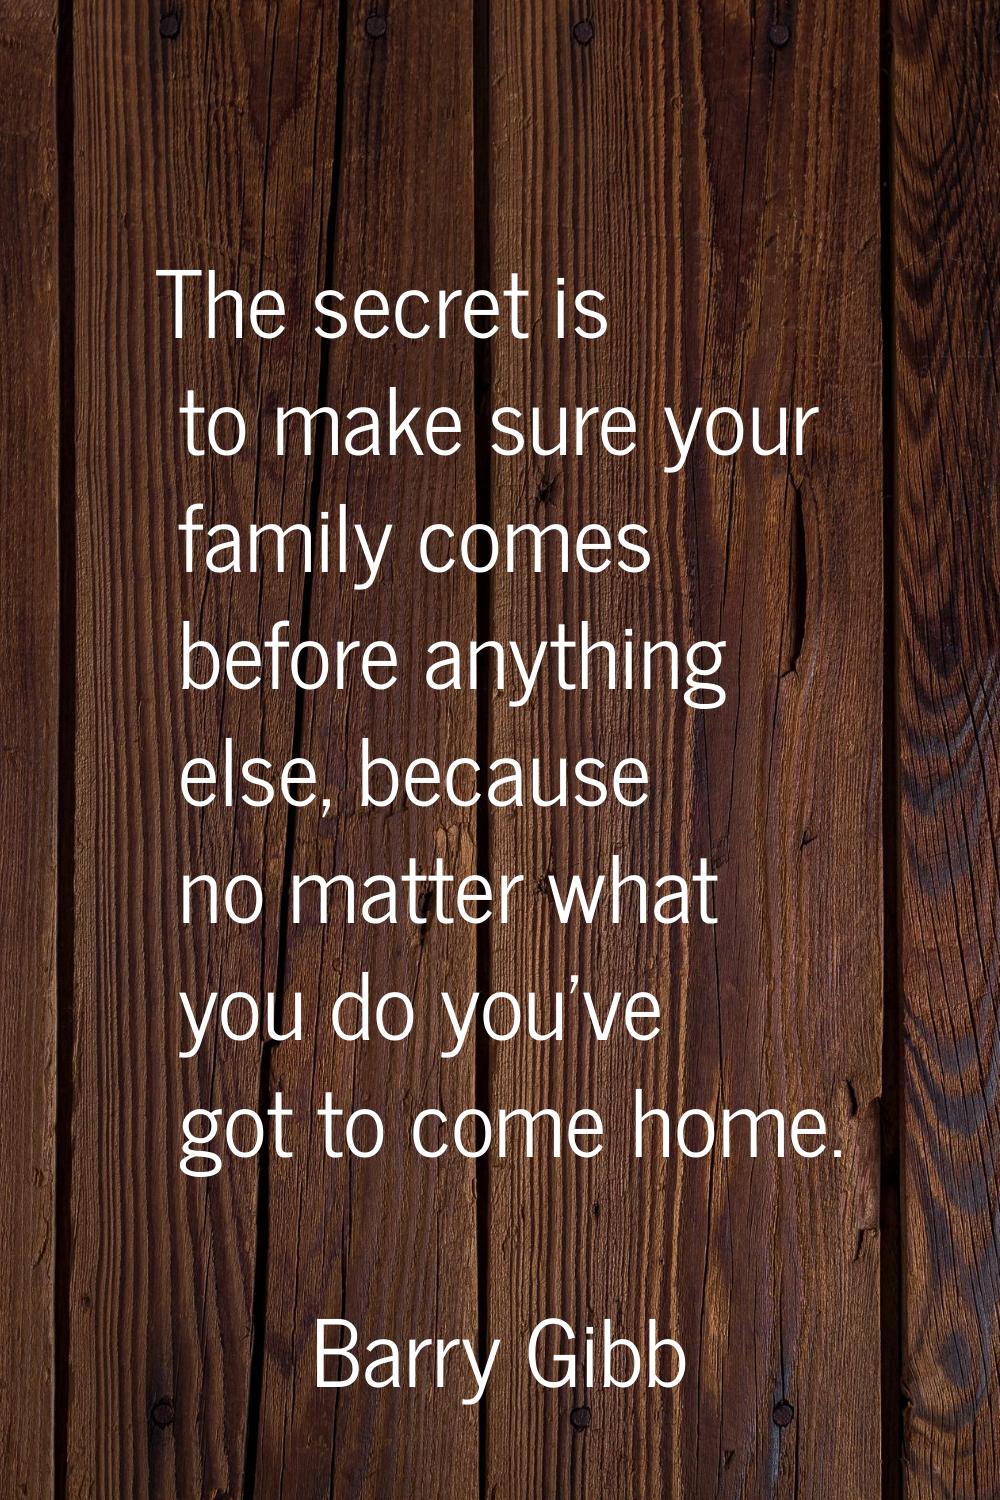 The secret is to make sure your family comes before anything else, because no matter what you do yo